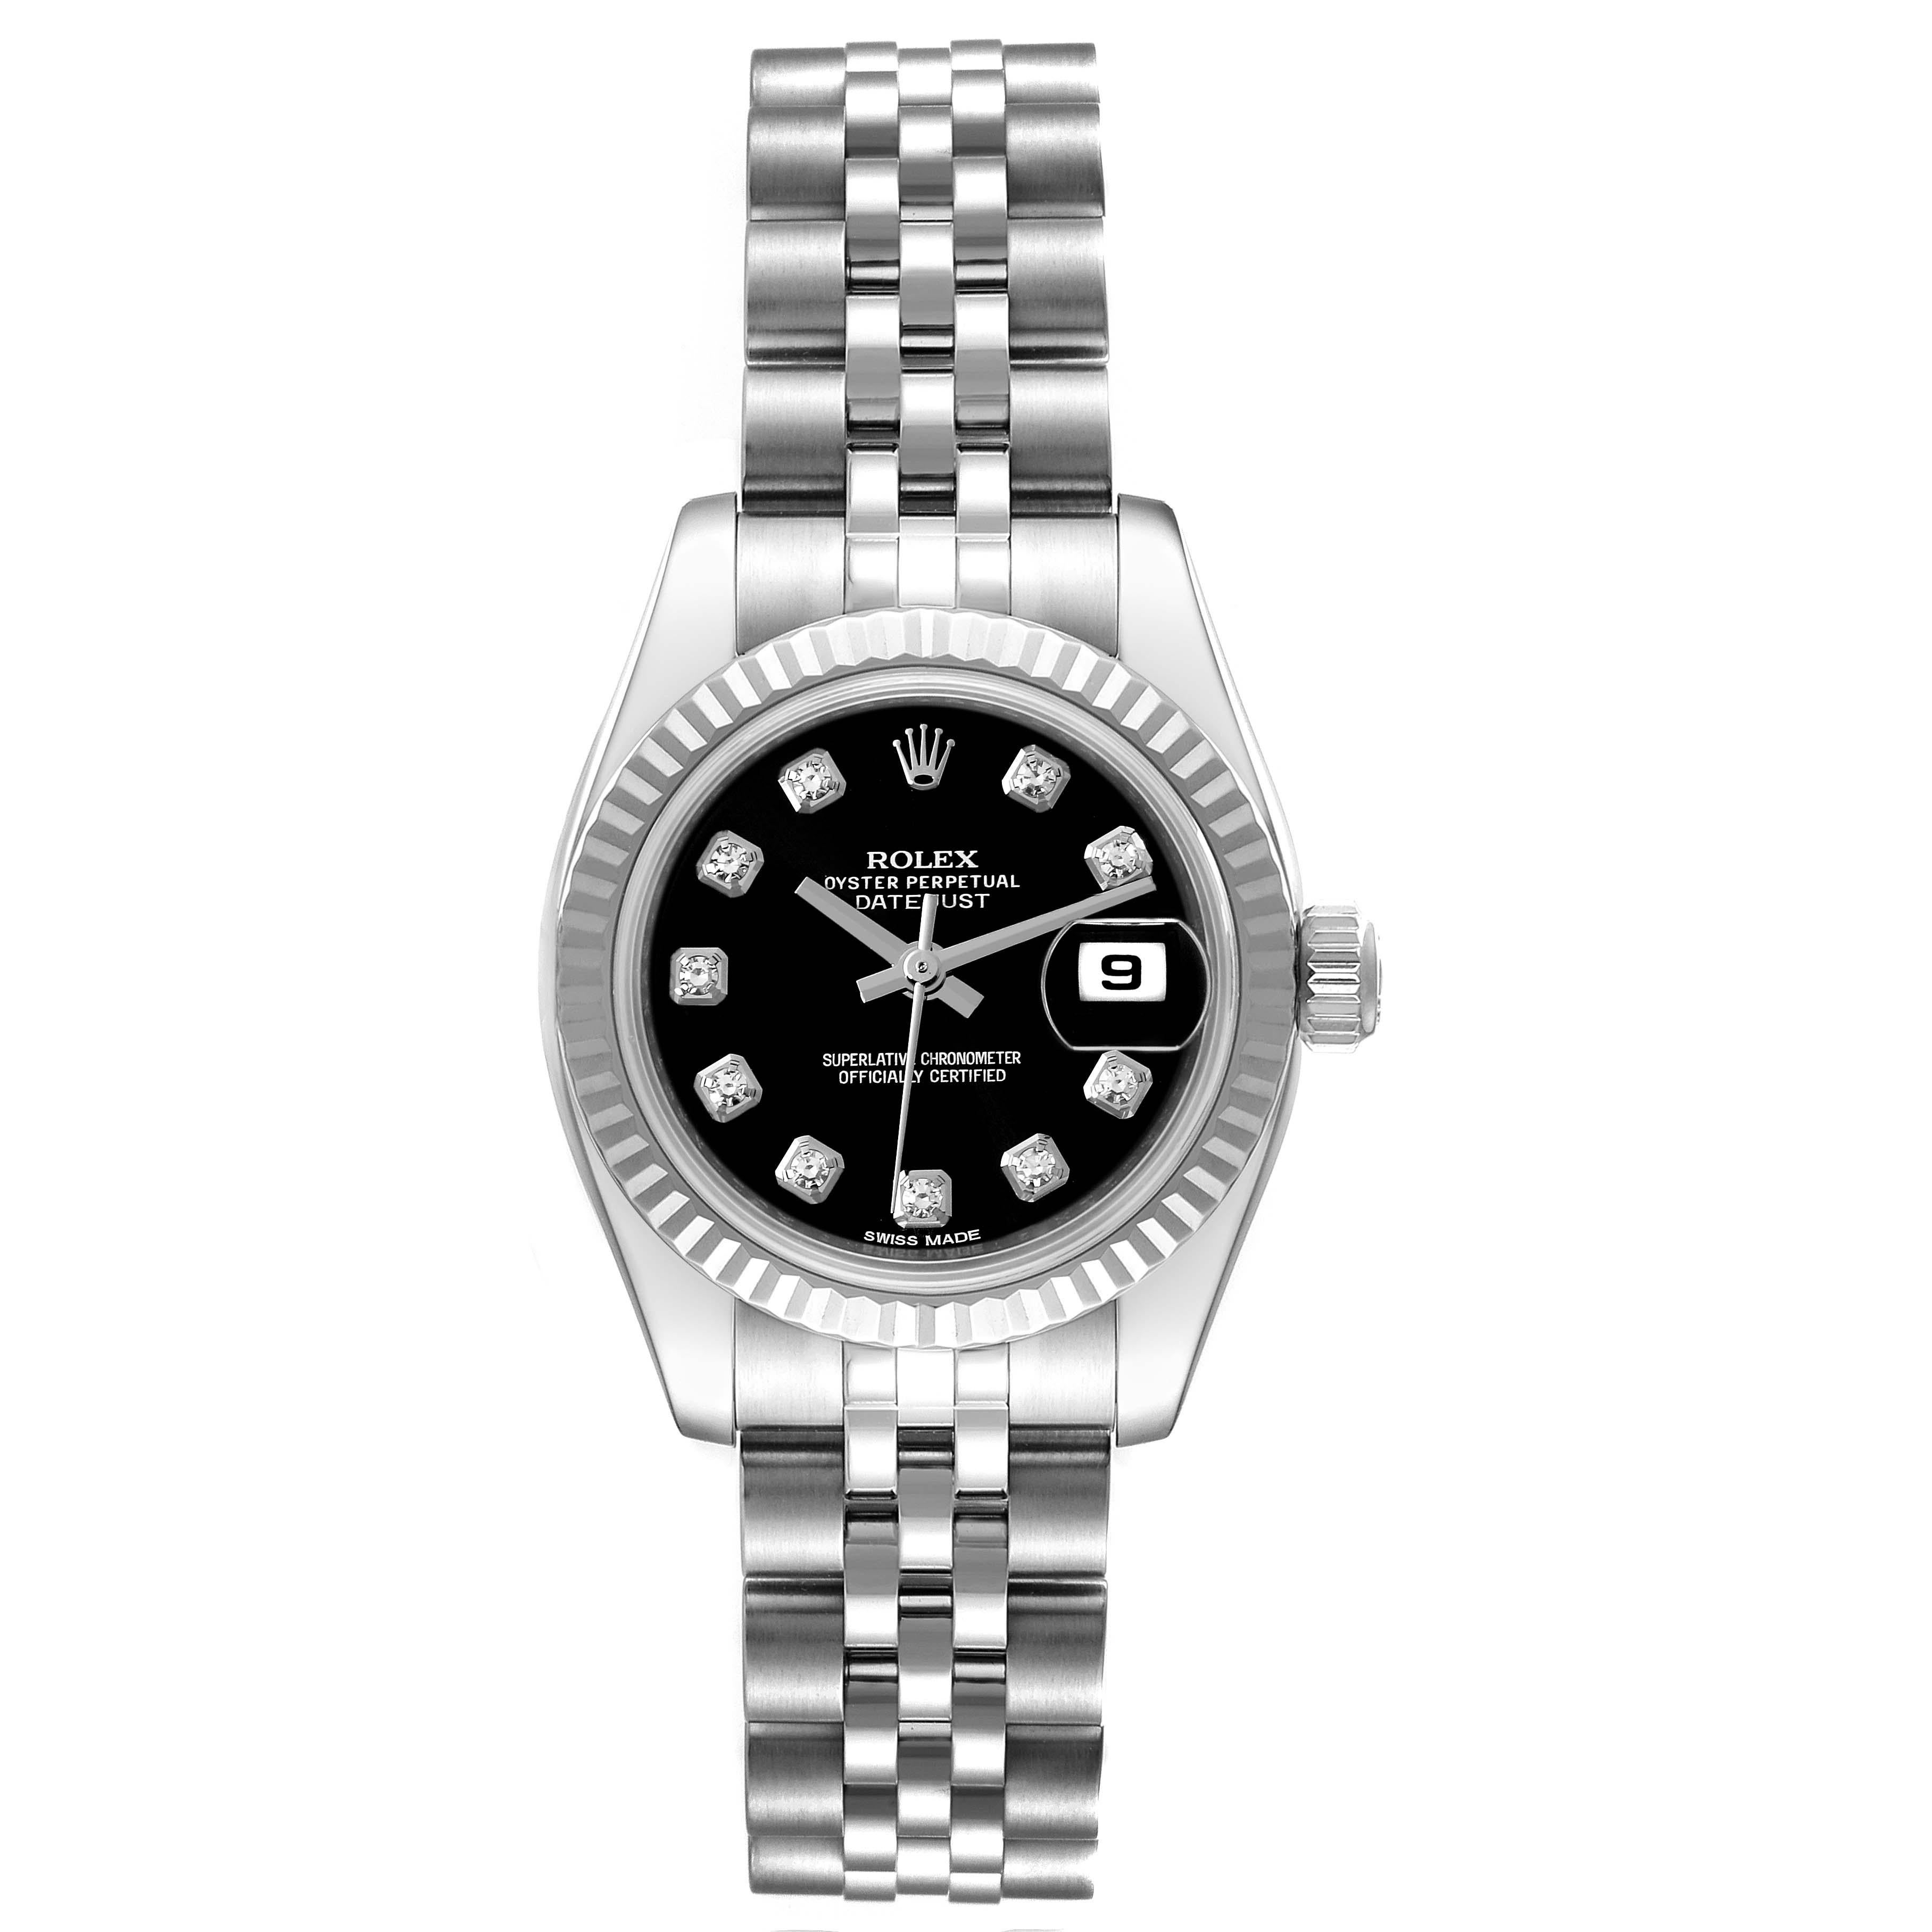 Rolex Datejust White Gold Black Diamond Dial Ladies Watch 179174 Box Card. Officially certified chronometer self-winding movement. Stainless steel oyster case 26.0 mm in diameter. Rolex logo on a crown. 18K white gold fluted bezel. Scratch resistant